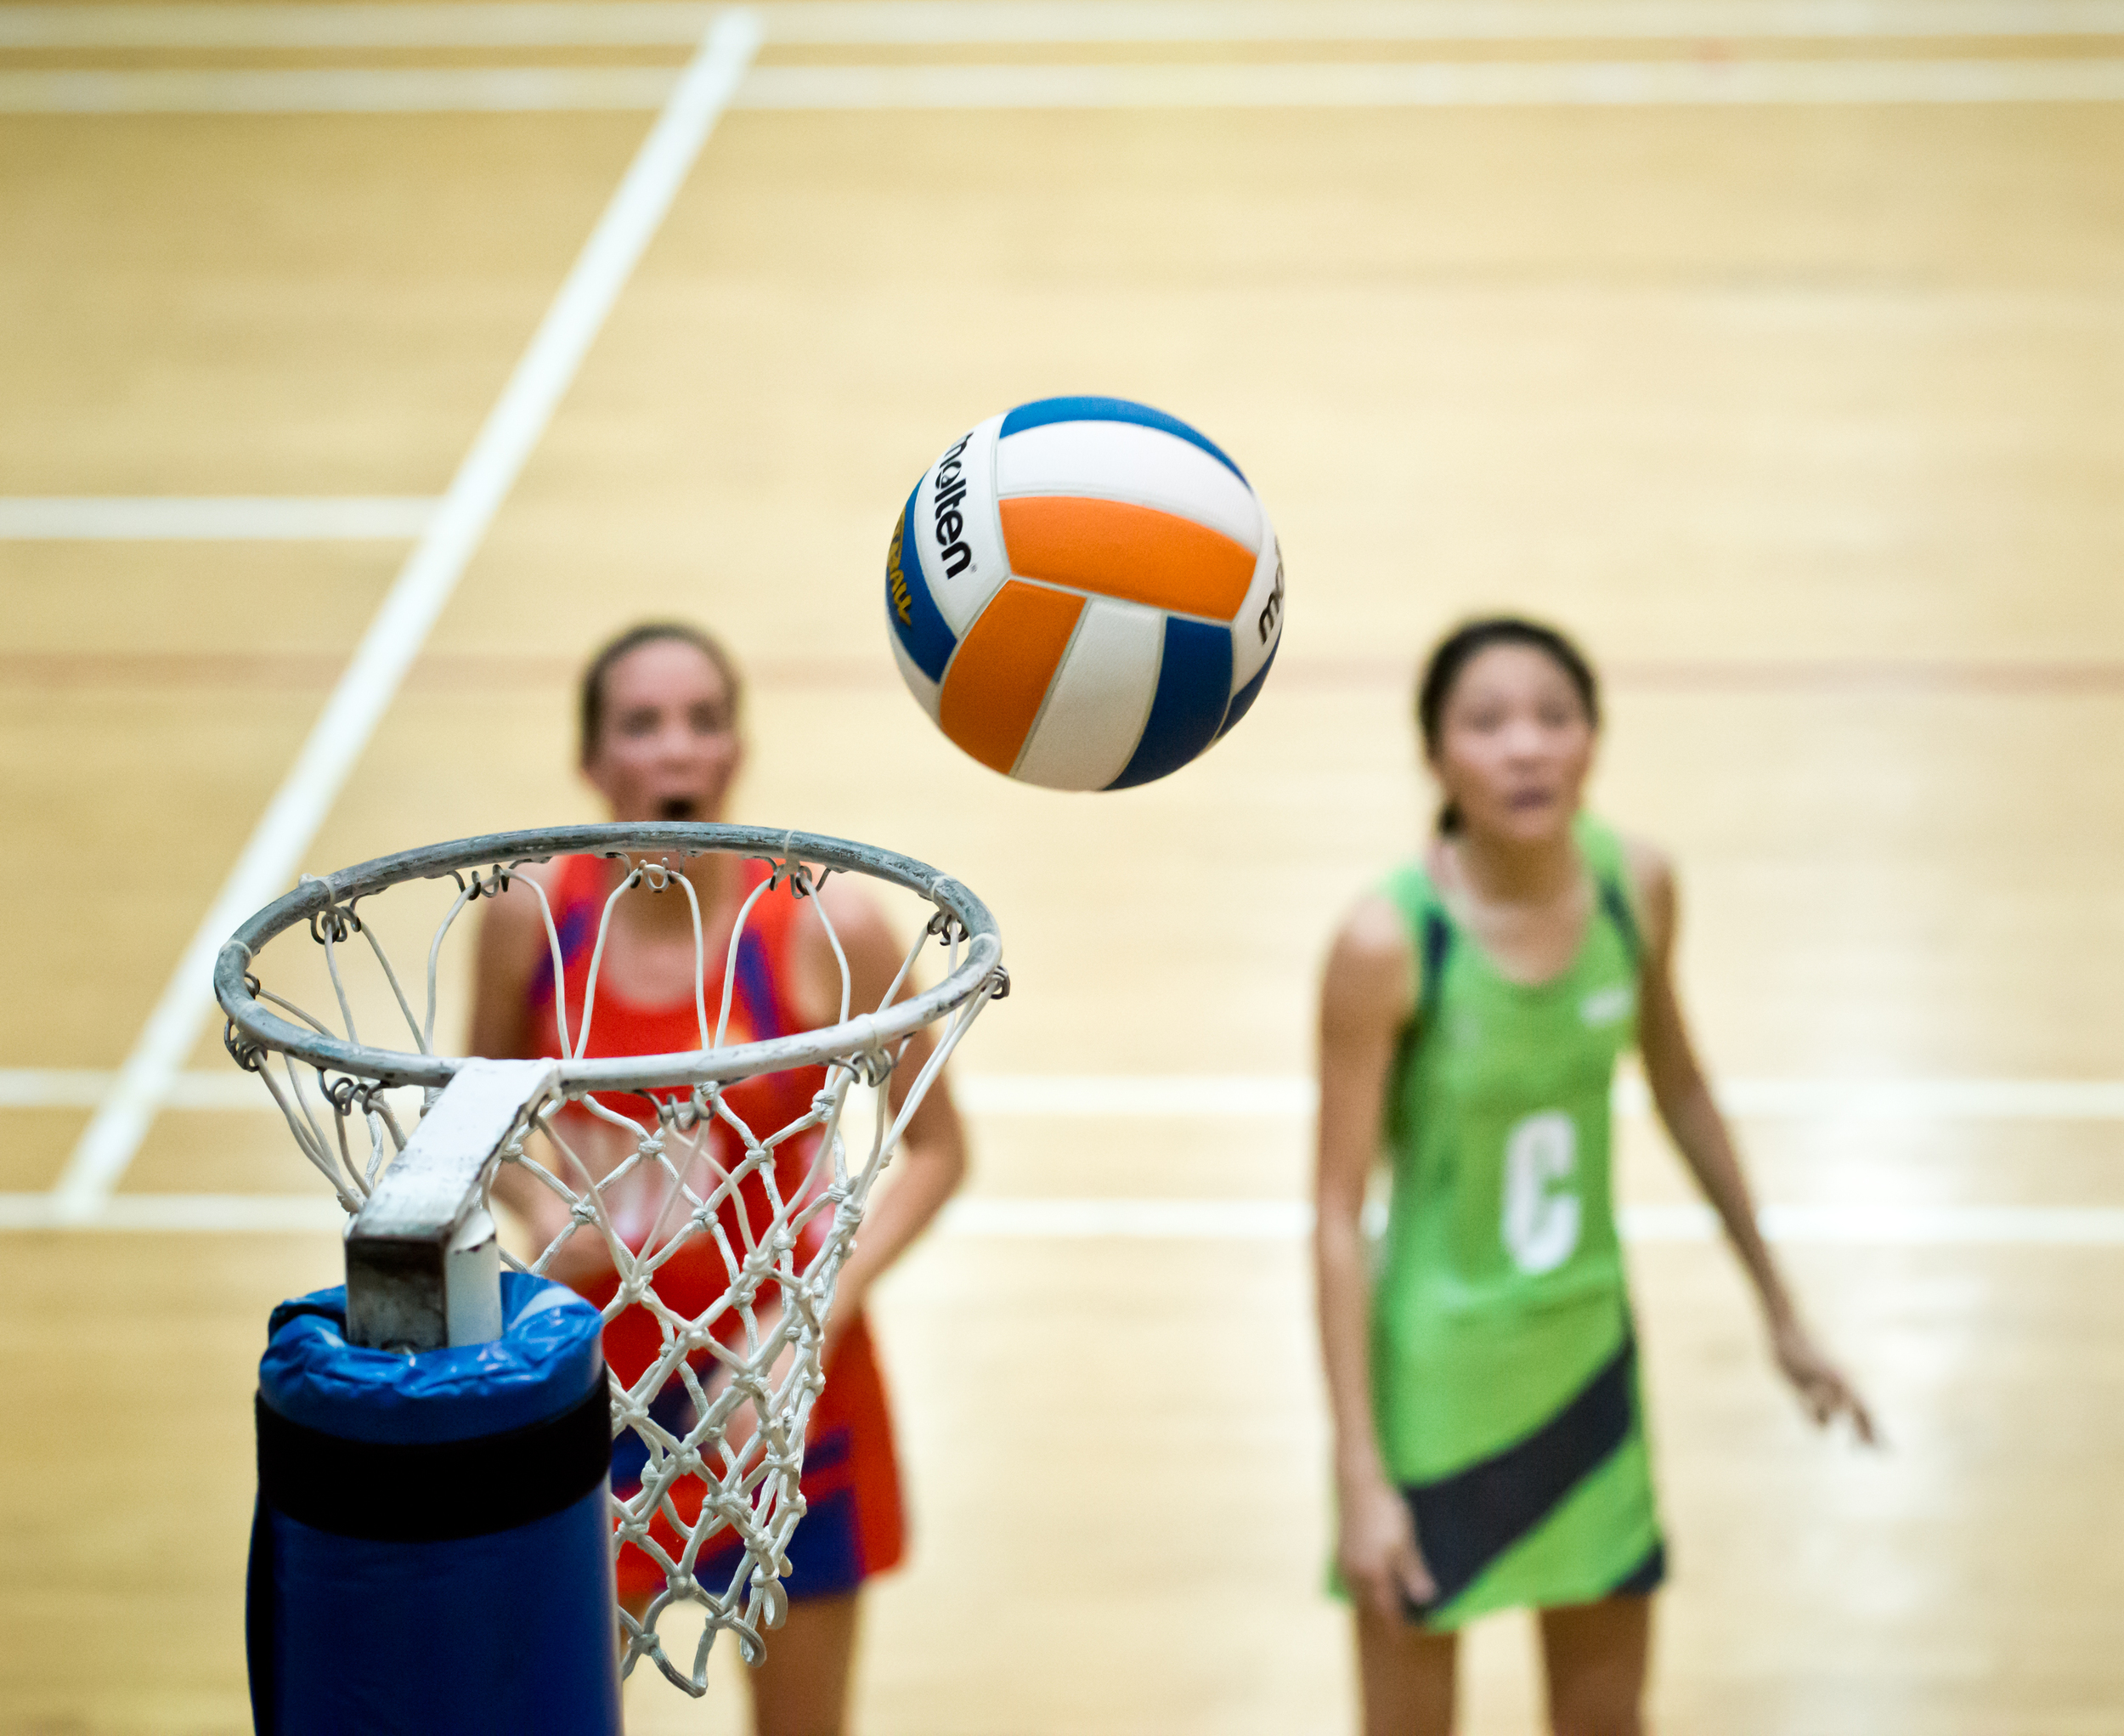 Netballers watch as a ball approaches the net during a Netball Super League match at the Toa Payoh Sports Hall.